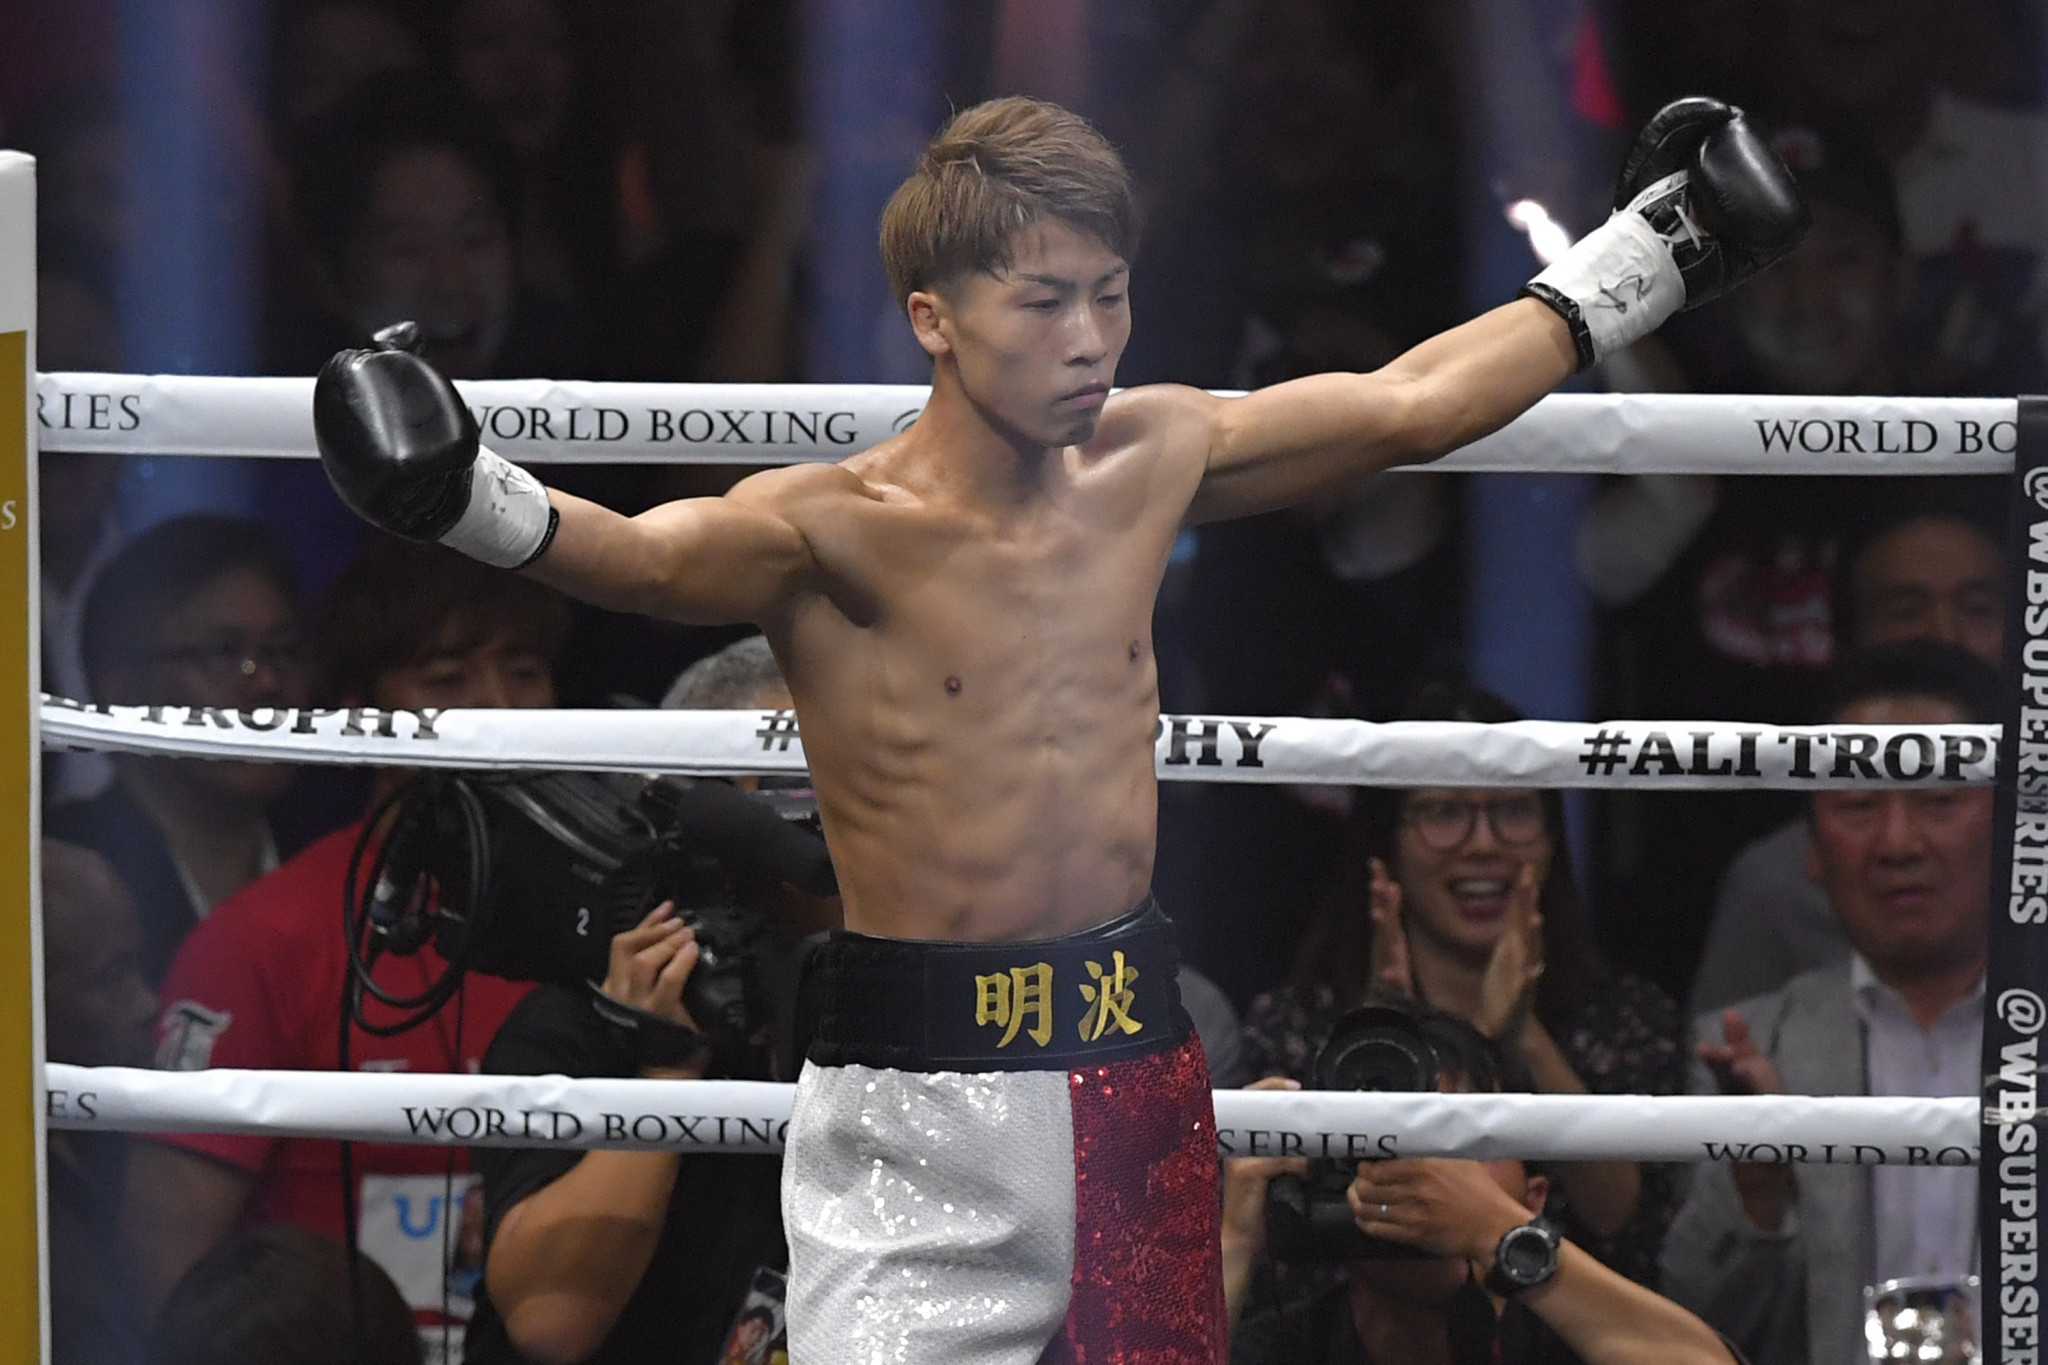 Japan boxing sensation Inoue defeated Mexico's Nery to retain his super-bantamweight titles. GETTY IMAGES